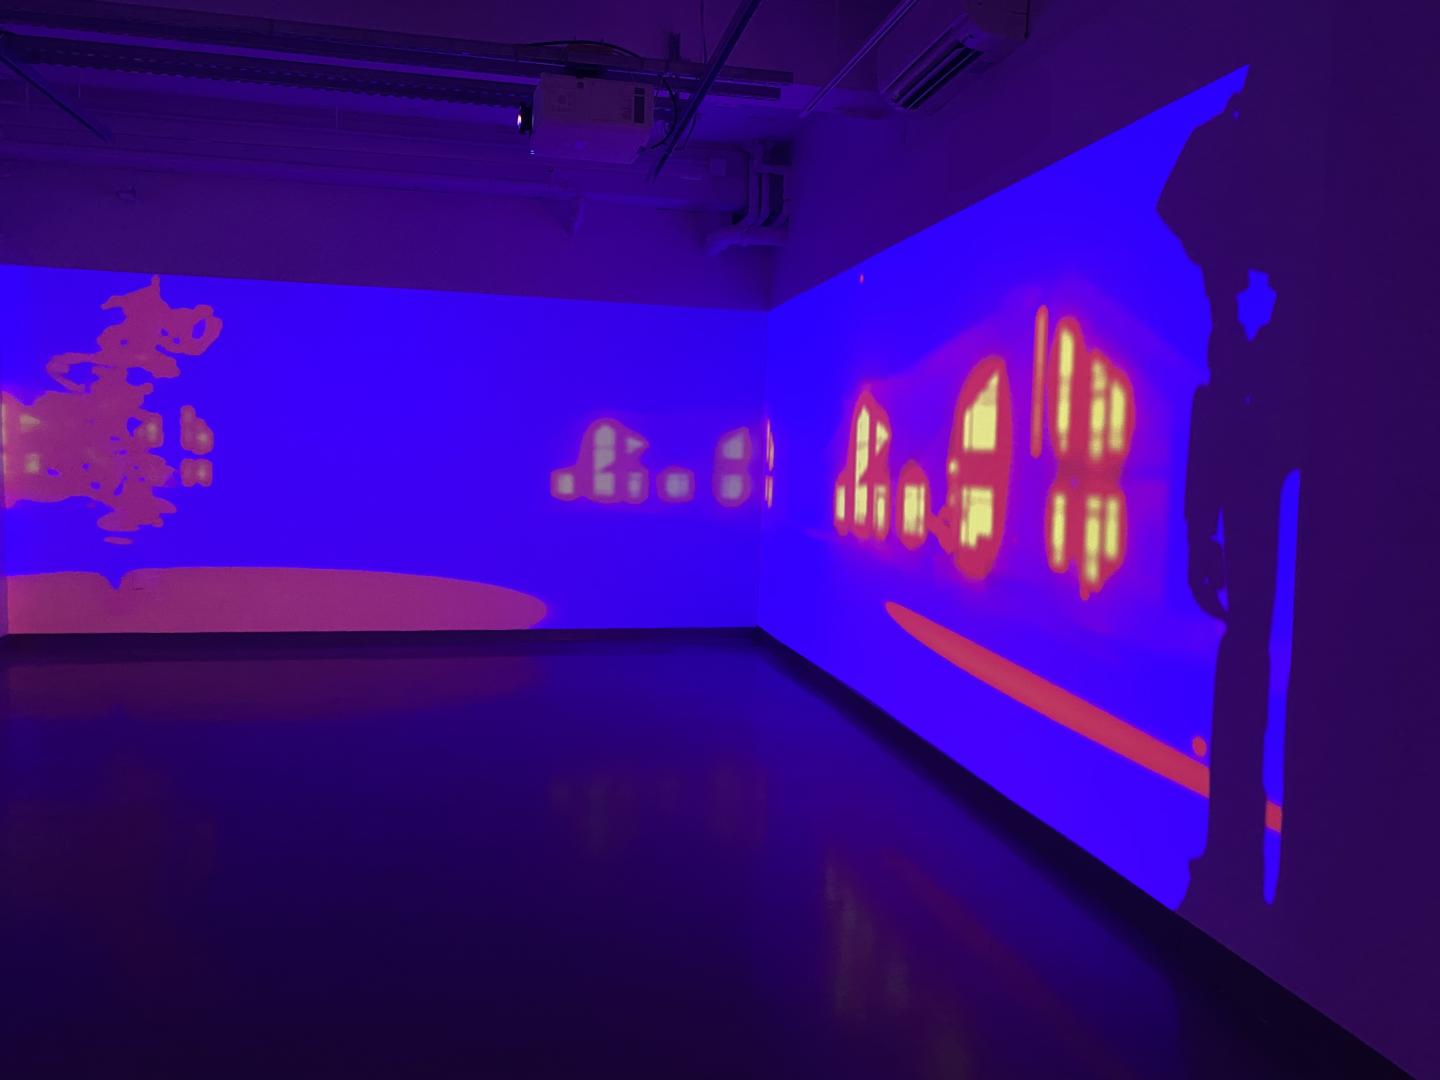 Dark gallery with immersive Single channel video projection in saturated colors.